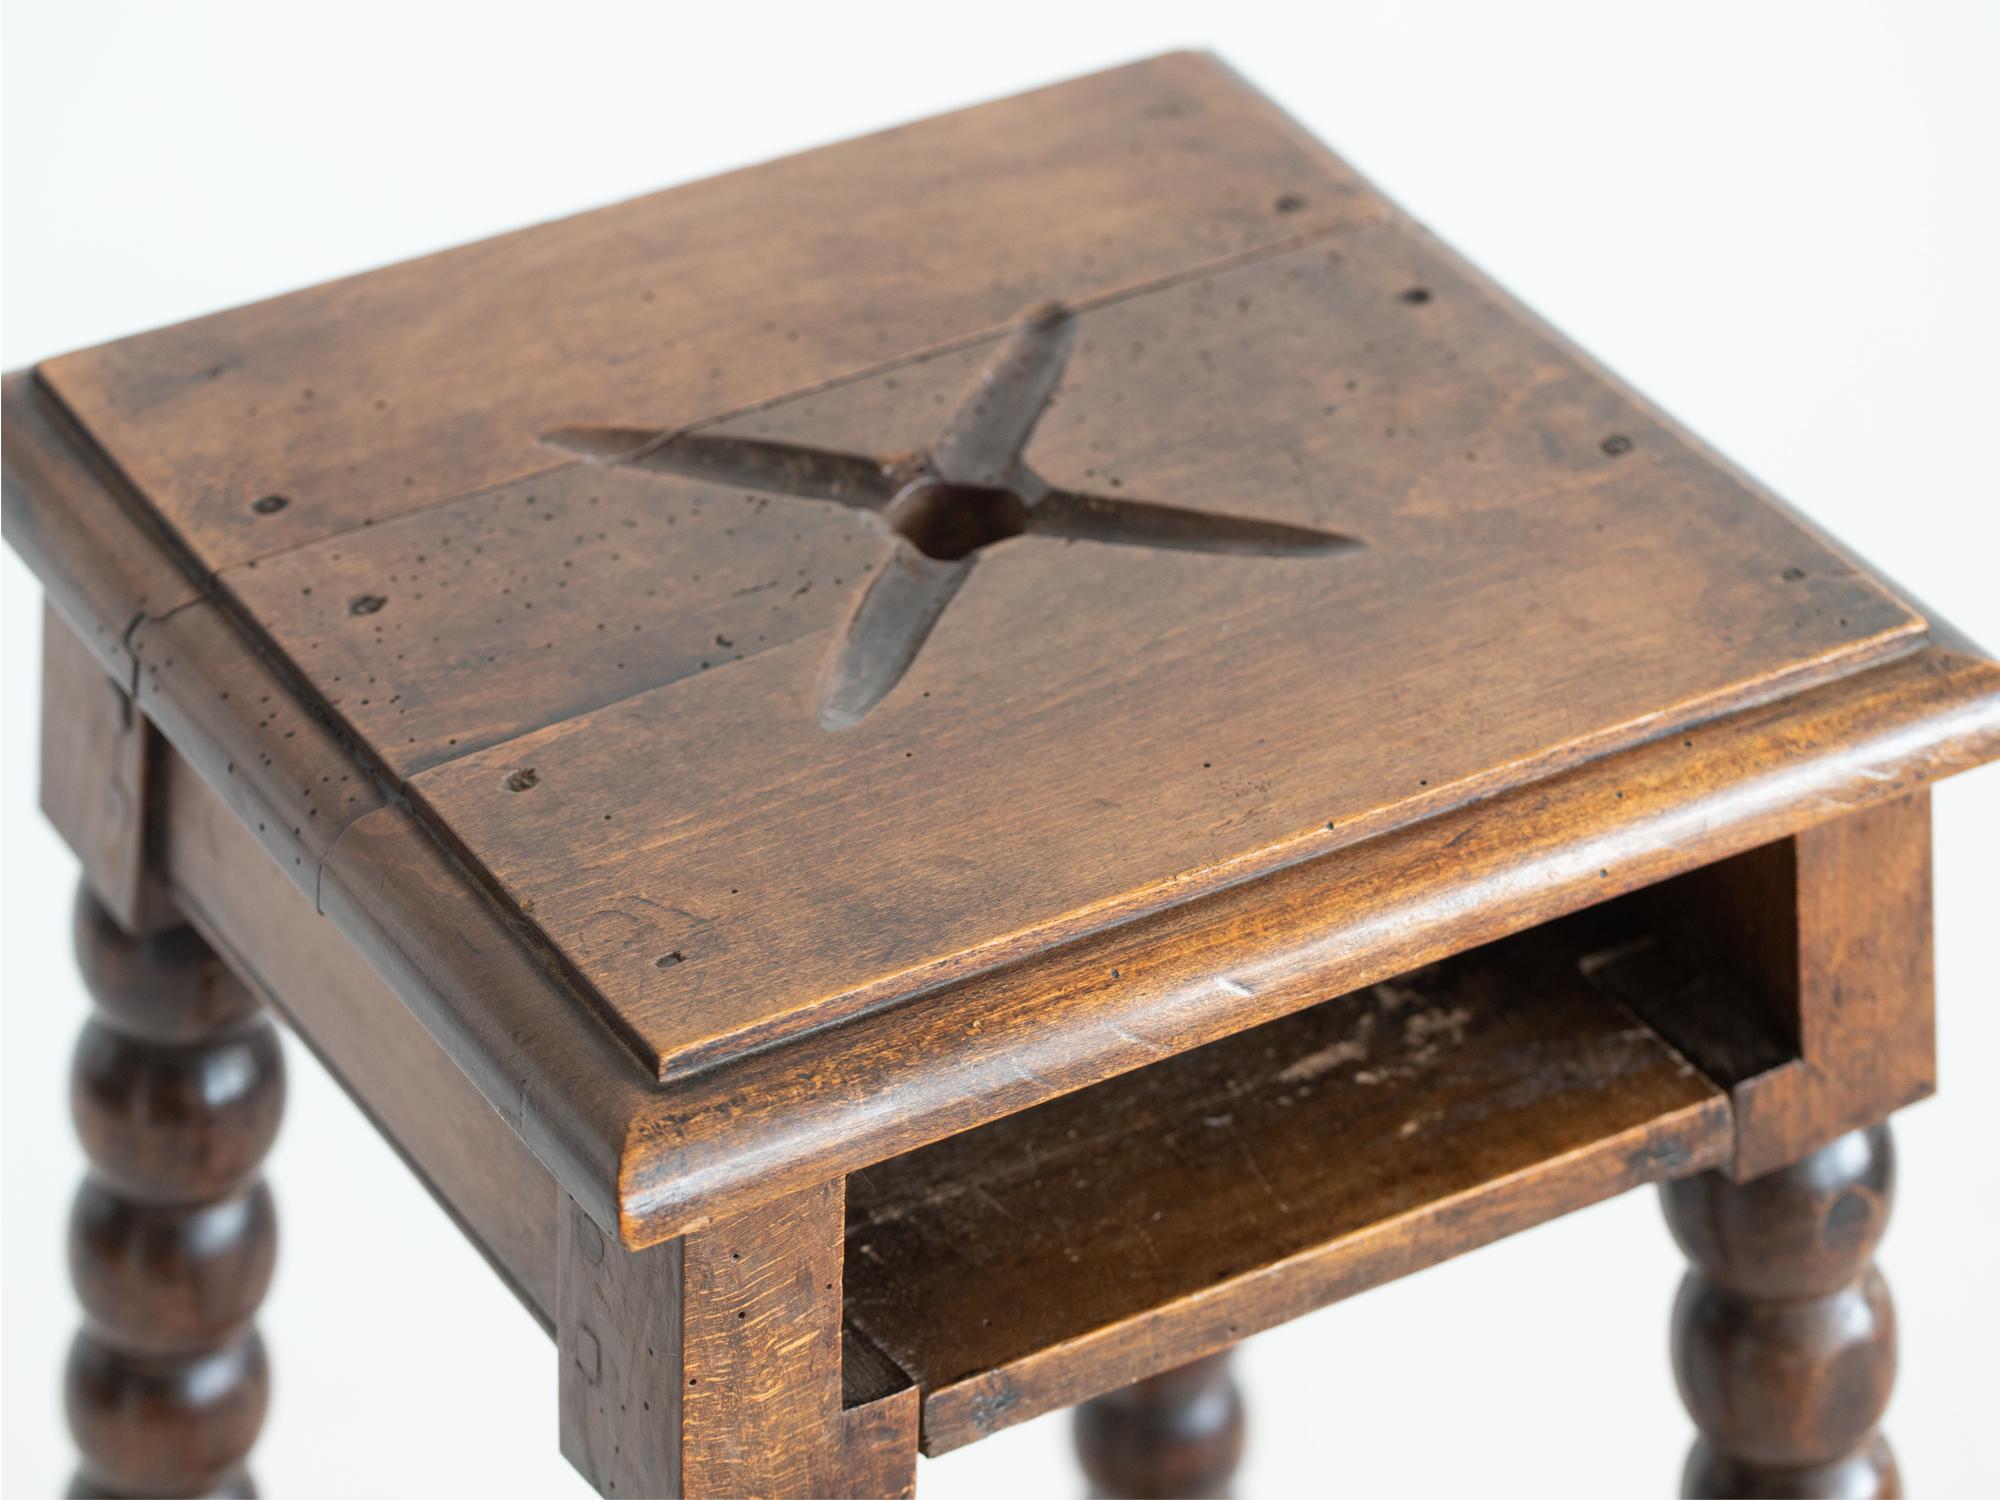 An ecclesiastical bobbin stool with recessed hymn book shelf. French, early 20C.

Stock ref. #2210

In good sturdy order. Some evidence of historic worm all treated as a precautionary and preventative measure.

69 x 37 x 37 cm (27.2 x 14.6 x 14.6